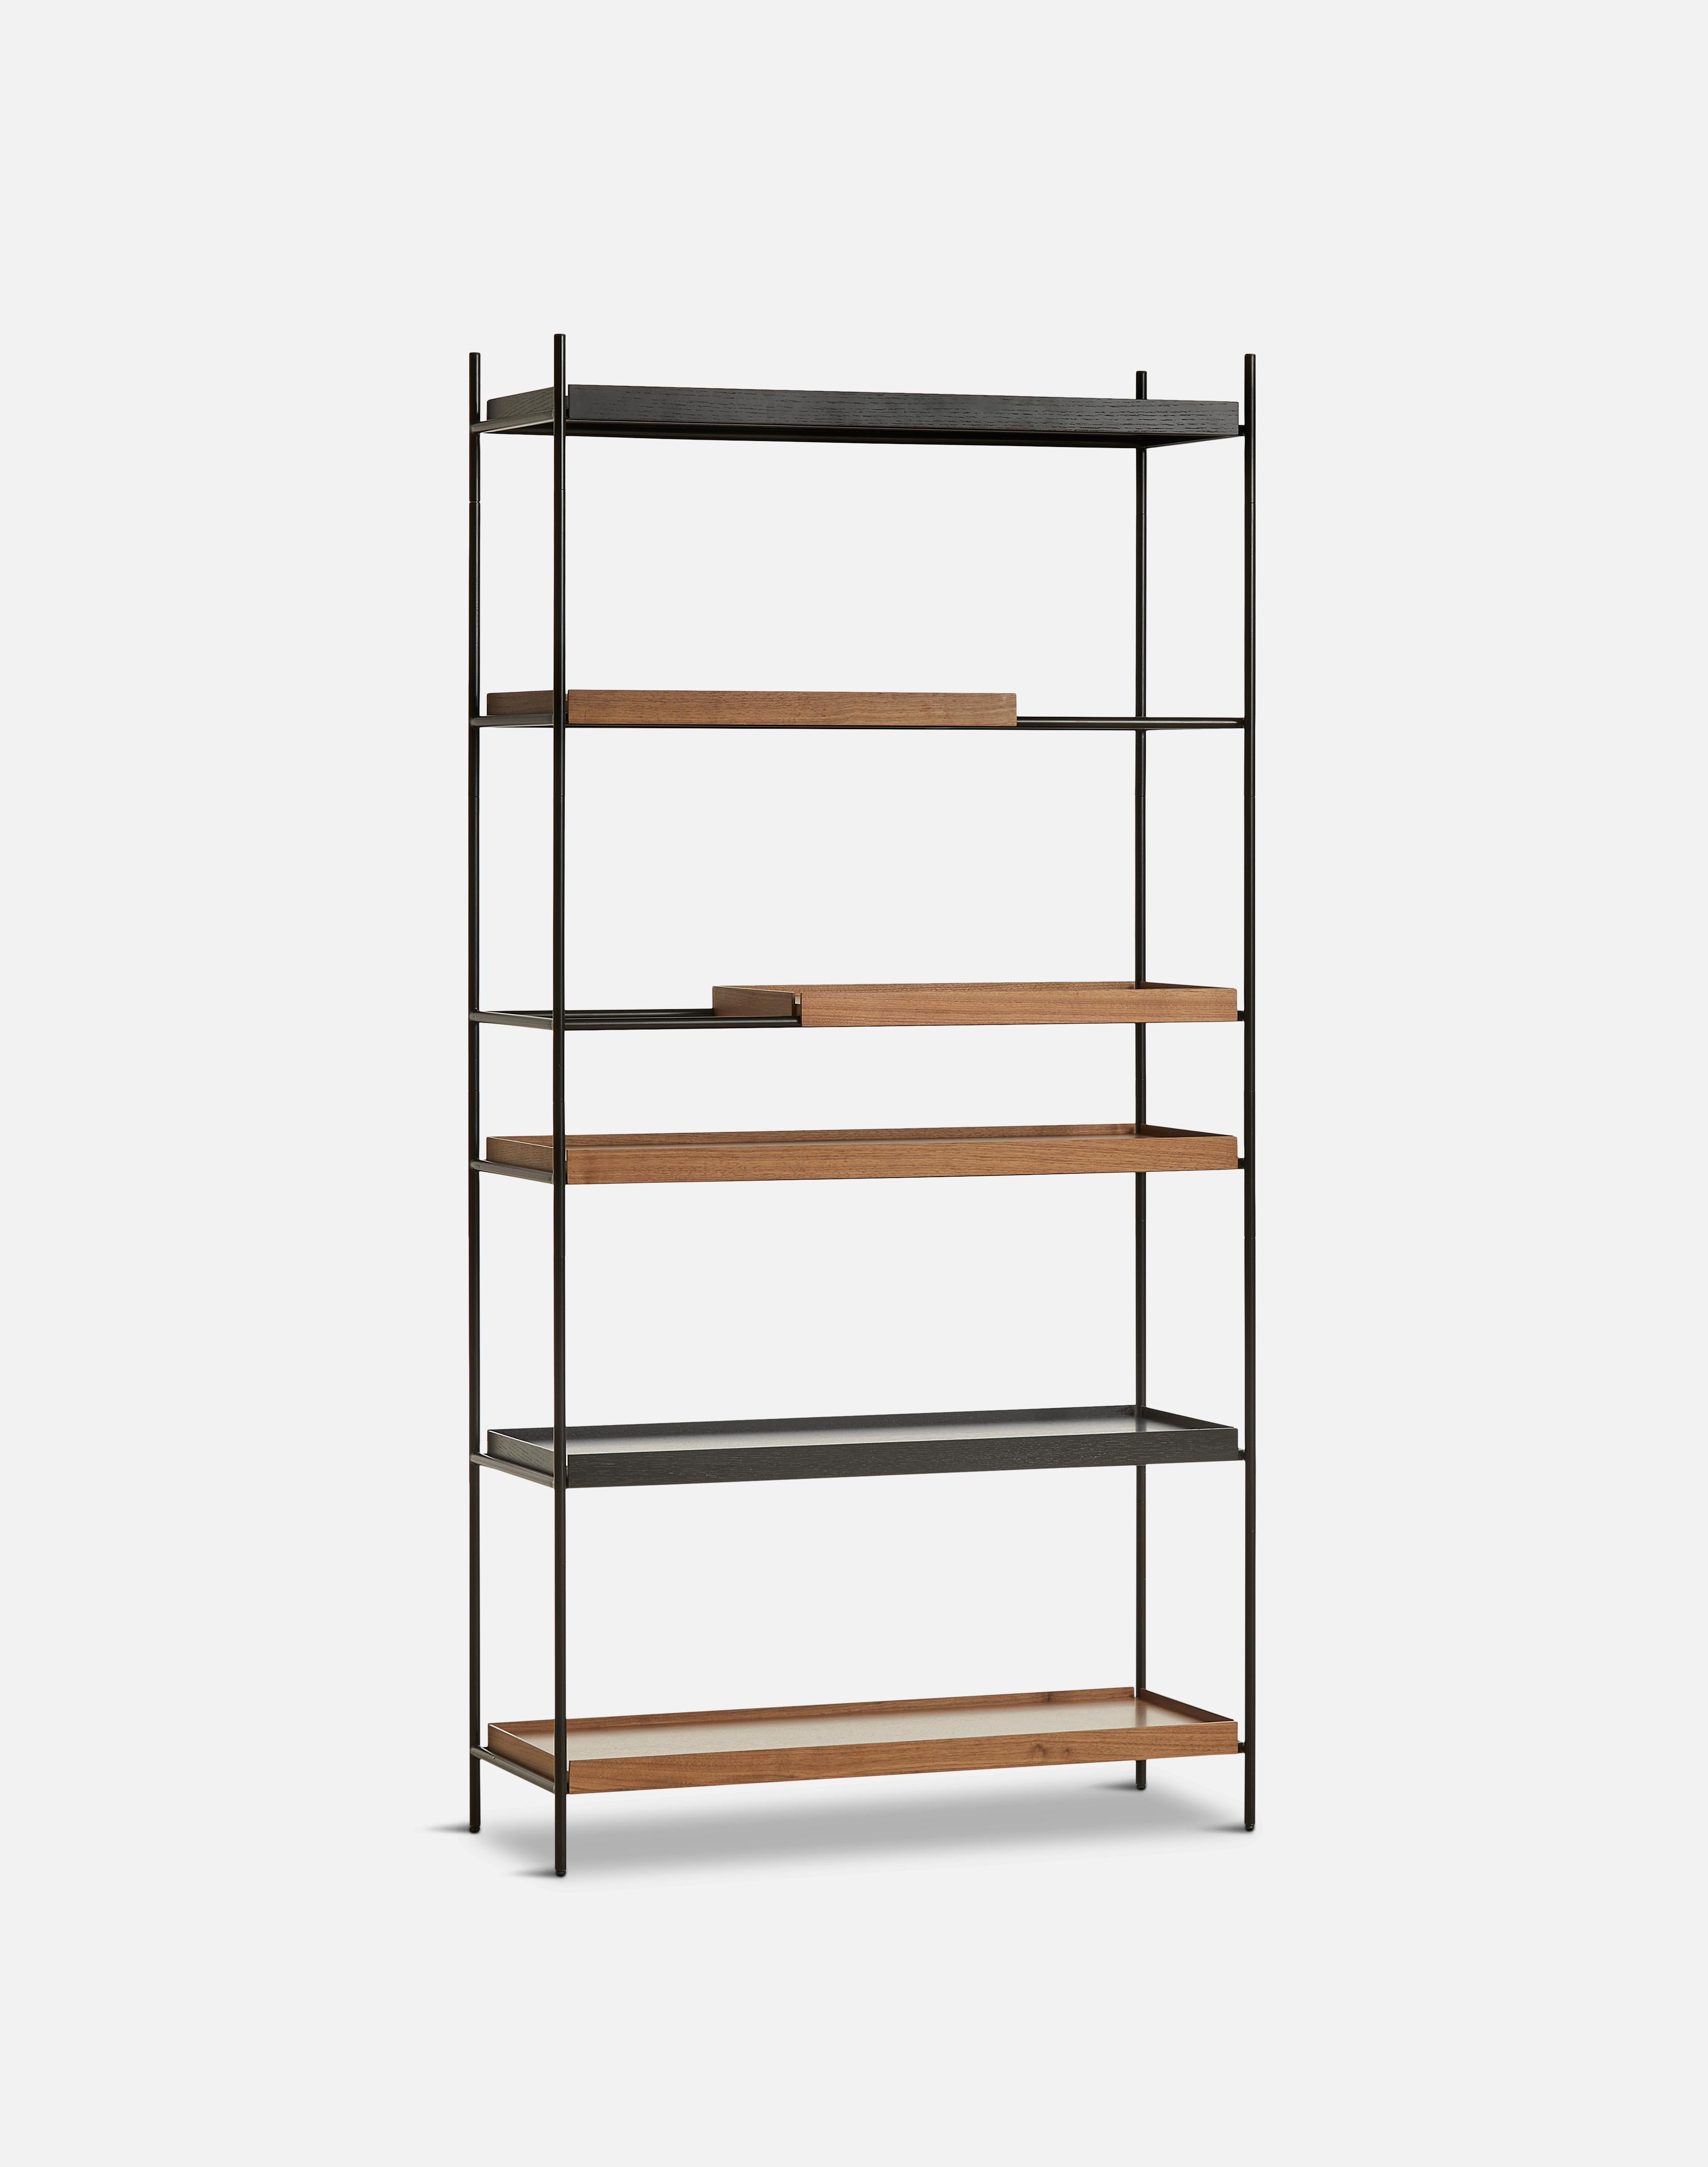 High walnut and black tray shelf III by Hanne Willmann.
Materials: metal, walnut.
Dimensions: D 40 x W 100 x H 201 cm
Also available in different tray conbinations and 2 sizes: H 81, H 201 cm.

Hanne Willmann is a dynamic German designer with